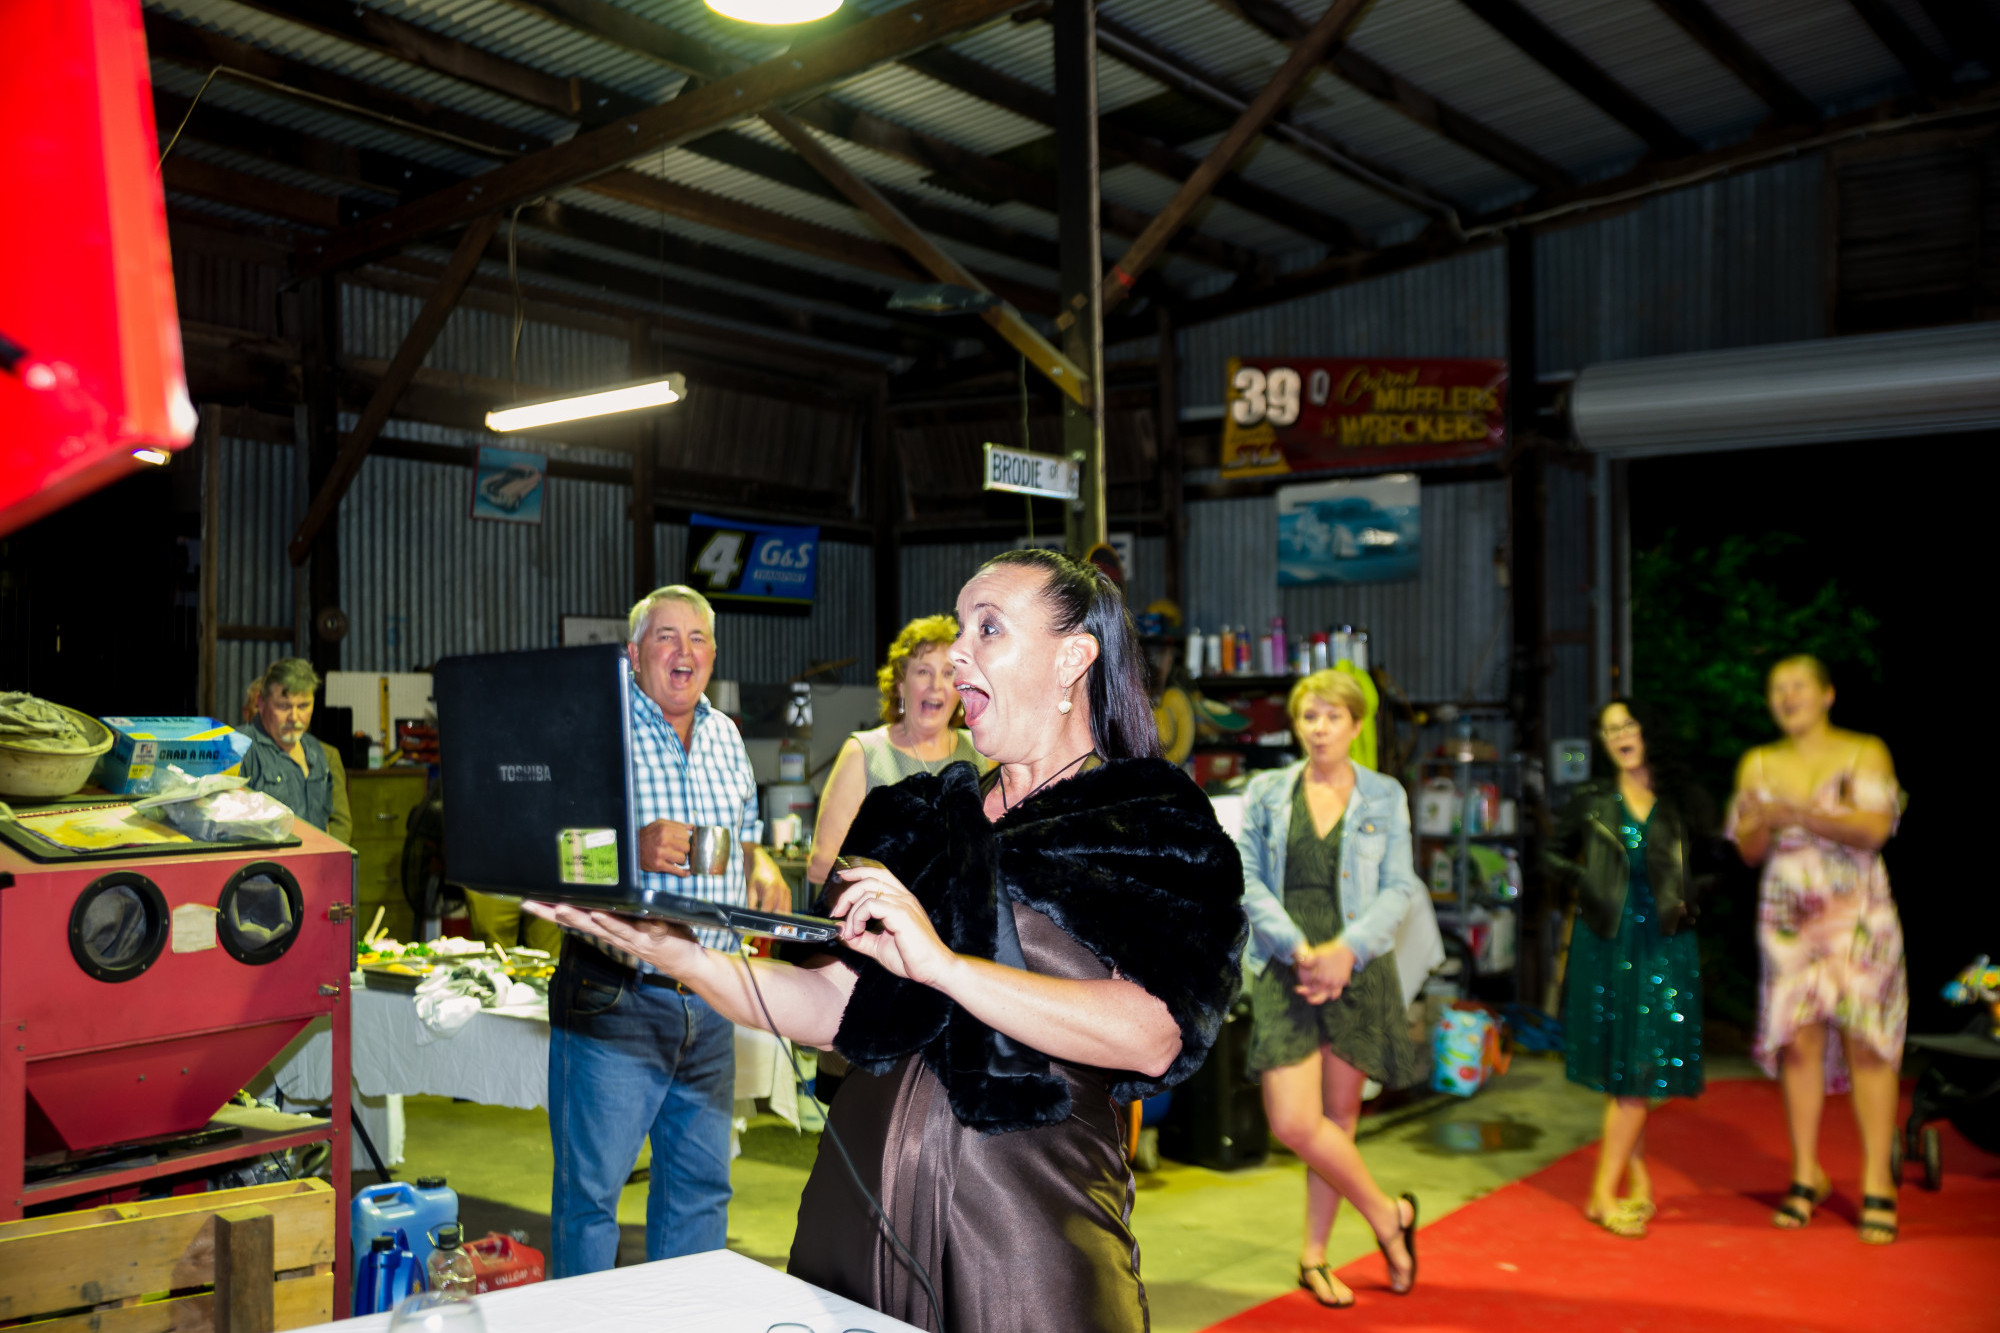 Heidi in her shed when her name was announced as the winner of the AusMumpreneur of the year award